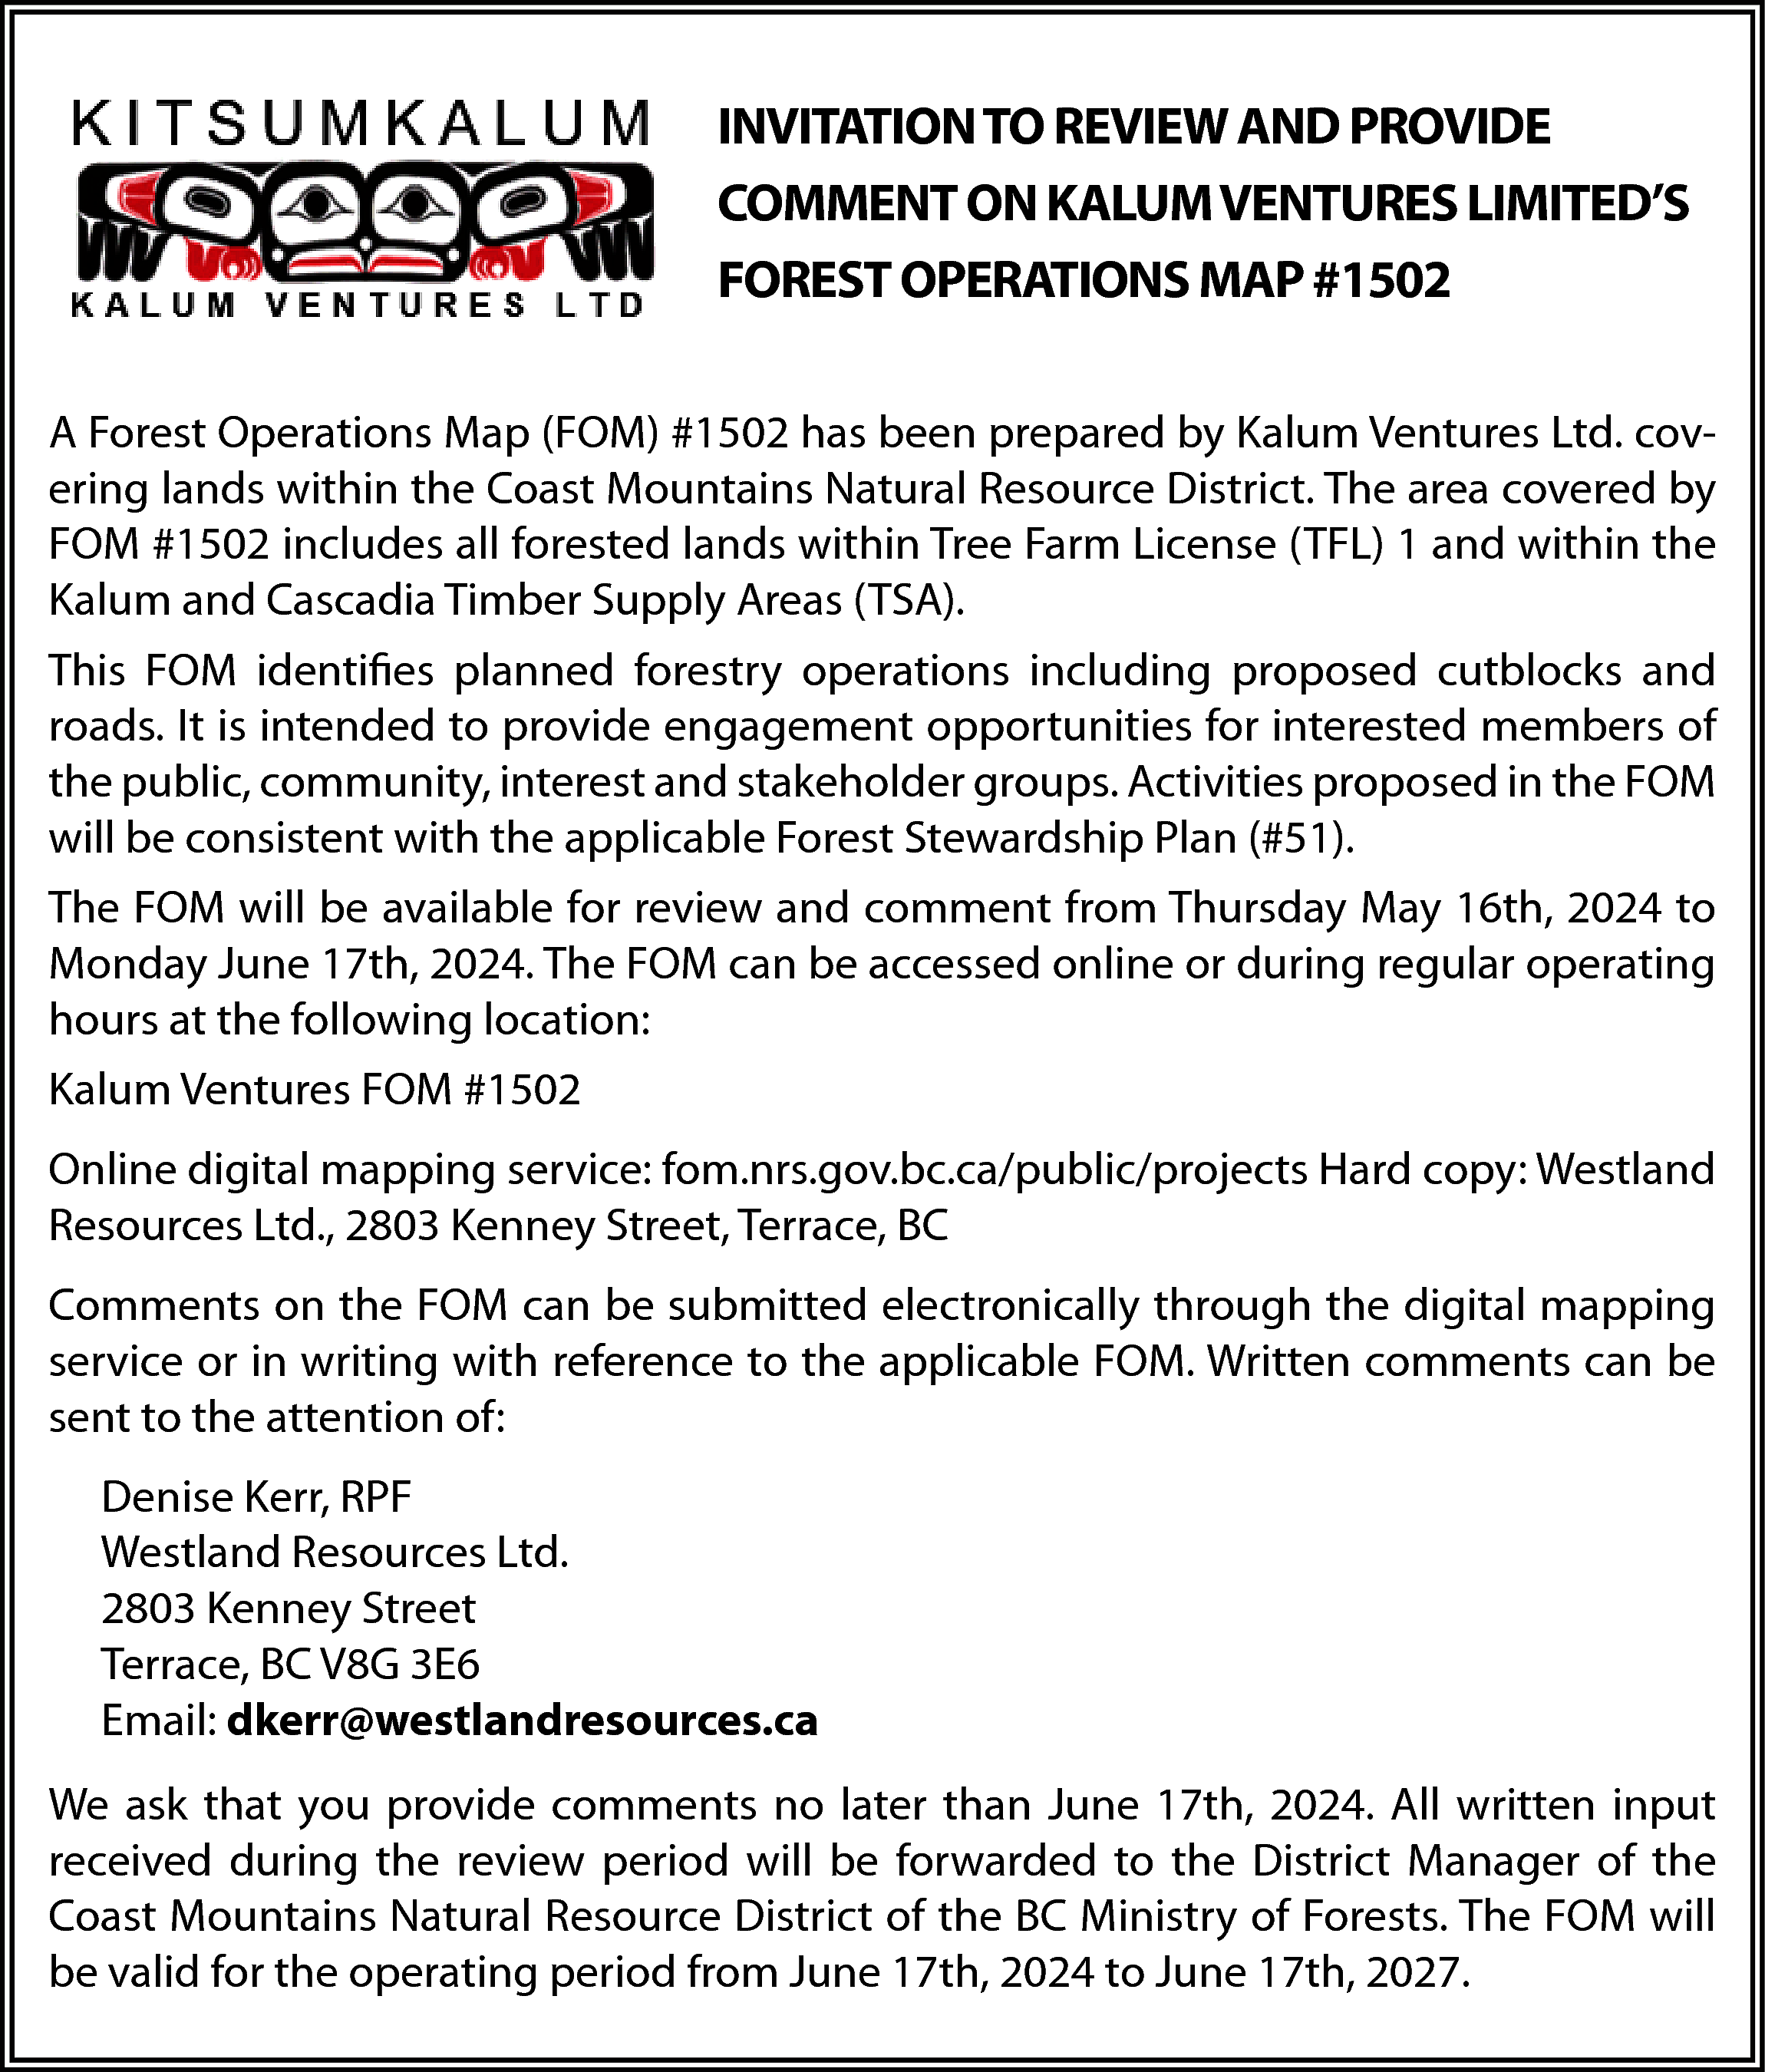 INVITATION TO REVIEW AND PROVIDE  INVITATION TO REVIEW AND PROVIDE  COMMENT ON KALUM VENTURES LIMITED’S  FOREST OPERATIONS MAP #1502  A Forest Operations Map (FOM) #1502 has been prepared by Kalum Ventures Ltd. covering lands within the Coast Mountains Natural Resource District. The area covered by  FOM #1502 includes all forested lands within Tree Farm License (TFL) 1 and within the  Kalum and Cascadia Timber Supply Areas (TSA).  This FOM identifies planned forestry operations including proposed cutblocks and  roads. It is intended to provide engagement opportunities for interested members of  the public, community, interest and stakeholder groups. Activities proposed in the FOM  will be consistent with the applicable Forest Stewardship Plan (#51).  The FOM will be available for review and comment from Thursday May 16th, 2024 to  Monday June 17th, 2024. The FOM can be accessed online or during regular operating  hours at the following location:  Kalum Ventures FOM #1502  Online digital mapping service: fom.nrs.gov.bc.ca/public/projects Hard copy: Westland  Resources Ltd., 2803 Kenney Street, Terrace, BC  Comments on the FOM can be submitted electronically through the digital mapping  service or in writing with reference to the applicable FOM. Written comments can be  sent to the attention of:  Denise Kerr, RPF  Westland Resources Ltd.  2803 Kenney Street  Terrace, BC V8G 3E6  Email: dkerr@westlandresources.ca  We ask that you provide comments no later than June 17th, 2024. All written input  received during the review period will be forwarded to the District Manager of the  Coast Mountains Natural Resource District of the BC Ministry of Forests. The FOM will  be valid for the operating period from June 17th, 2024 to June 17th, 2027.    